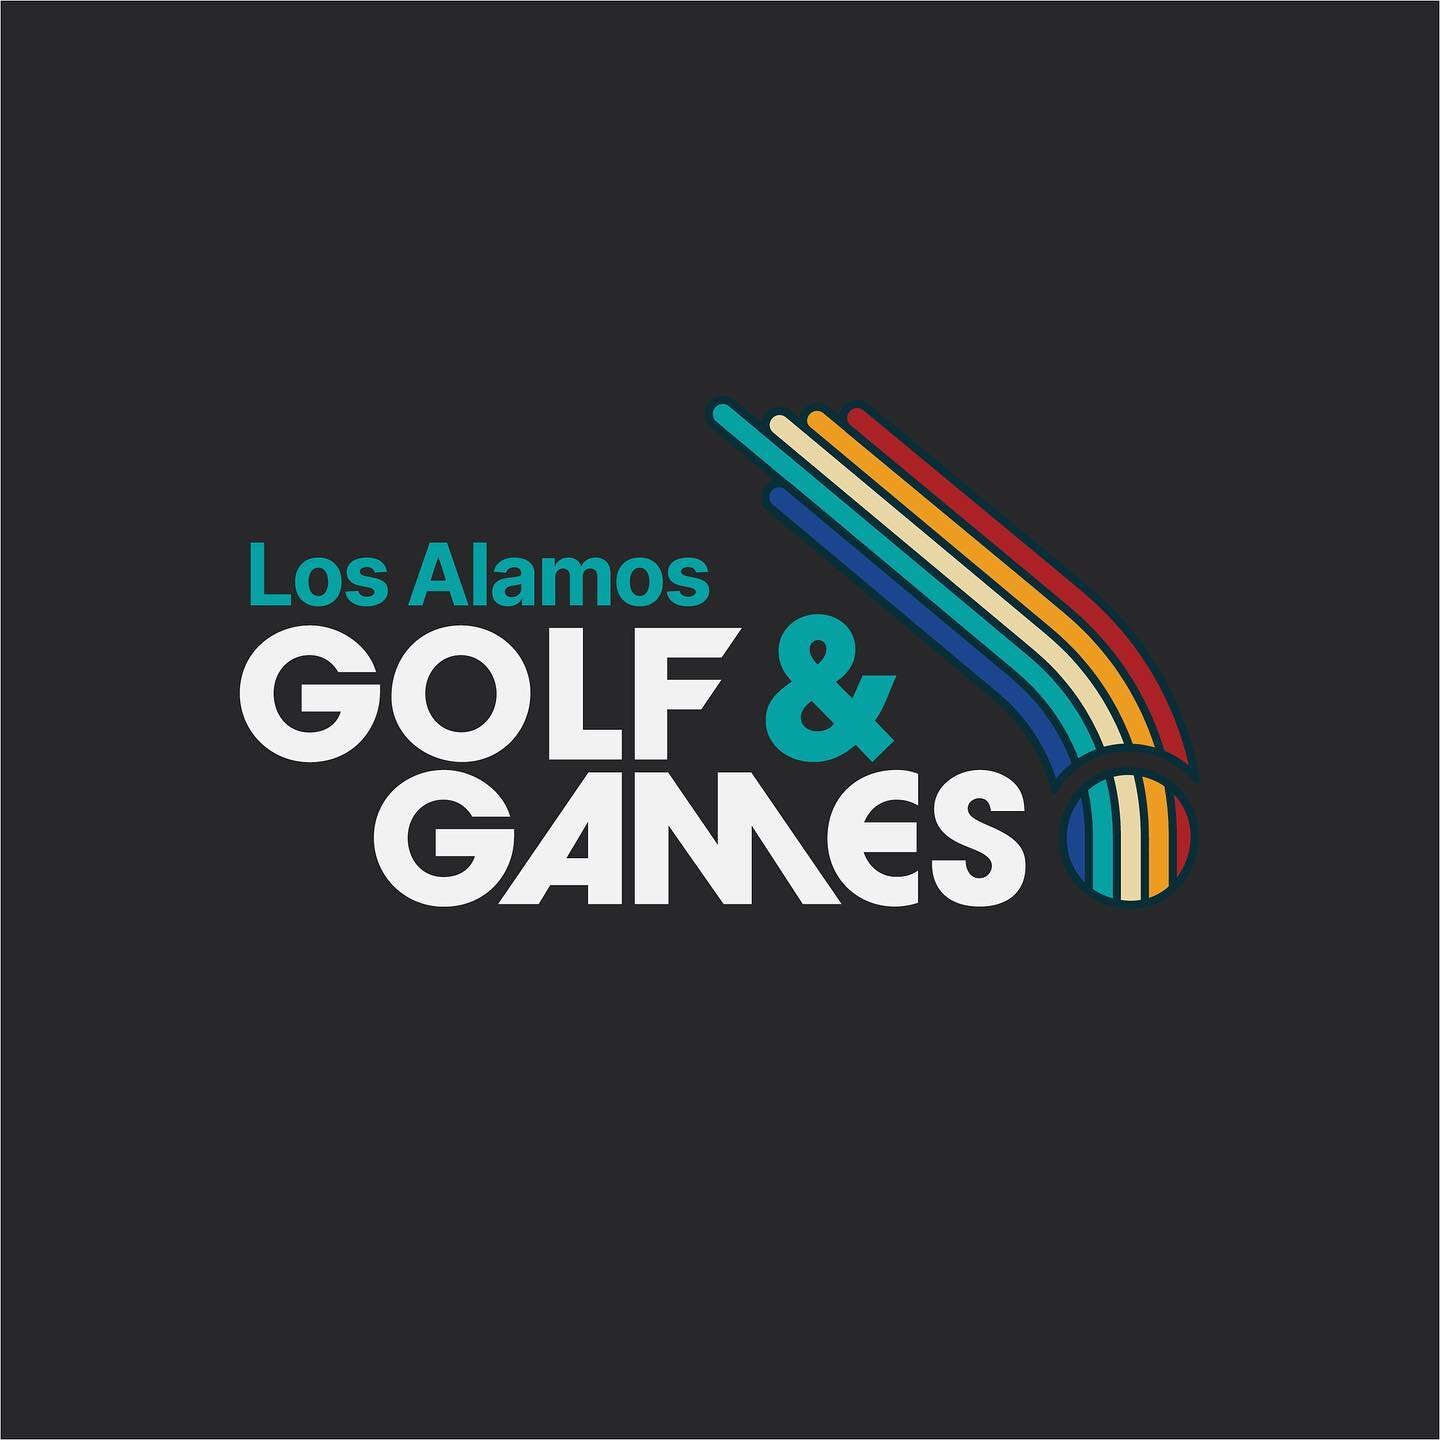 🕹️ Golf, Games, and expansion, oh my! 
Los Alamos Golf &amp; Games (@losalamosgolfandgames) was a participant in the latest edition of the Business Accelerator program by @los_alamos_mainstreet, and we got to develop a speed-round of brand new visua